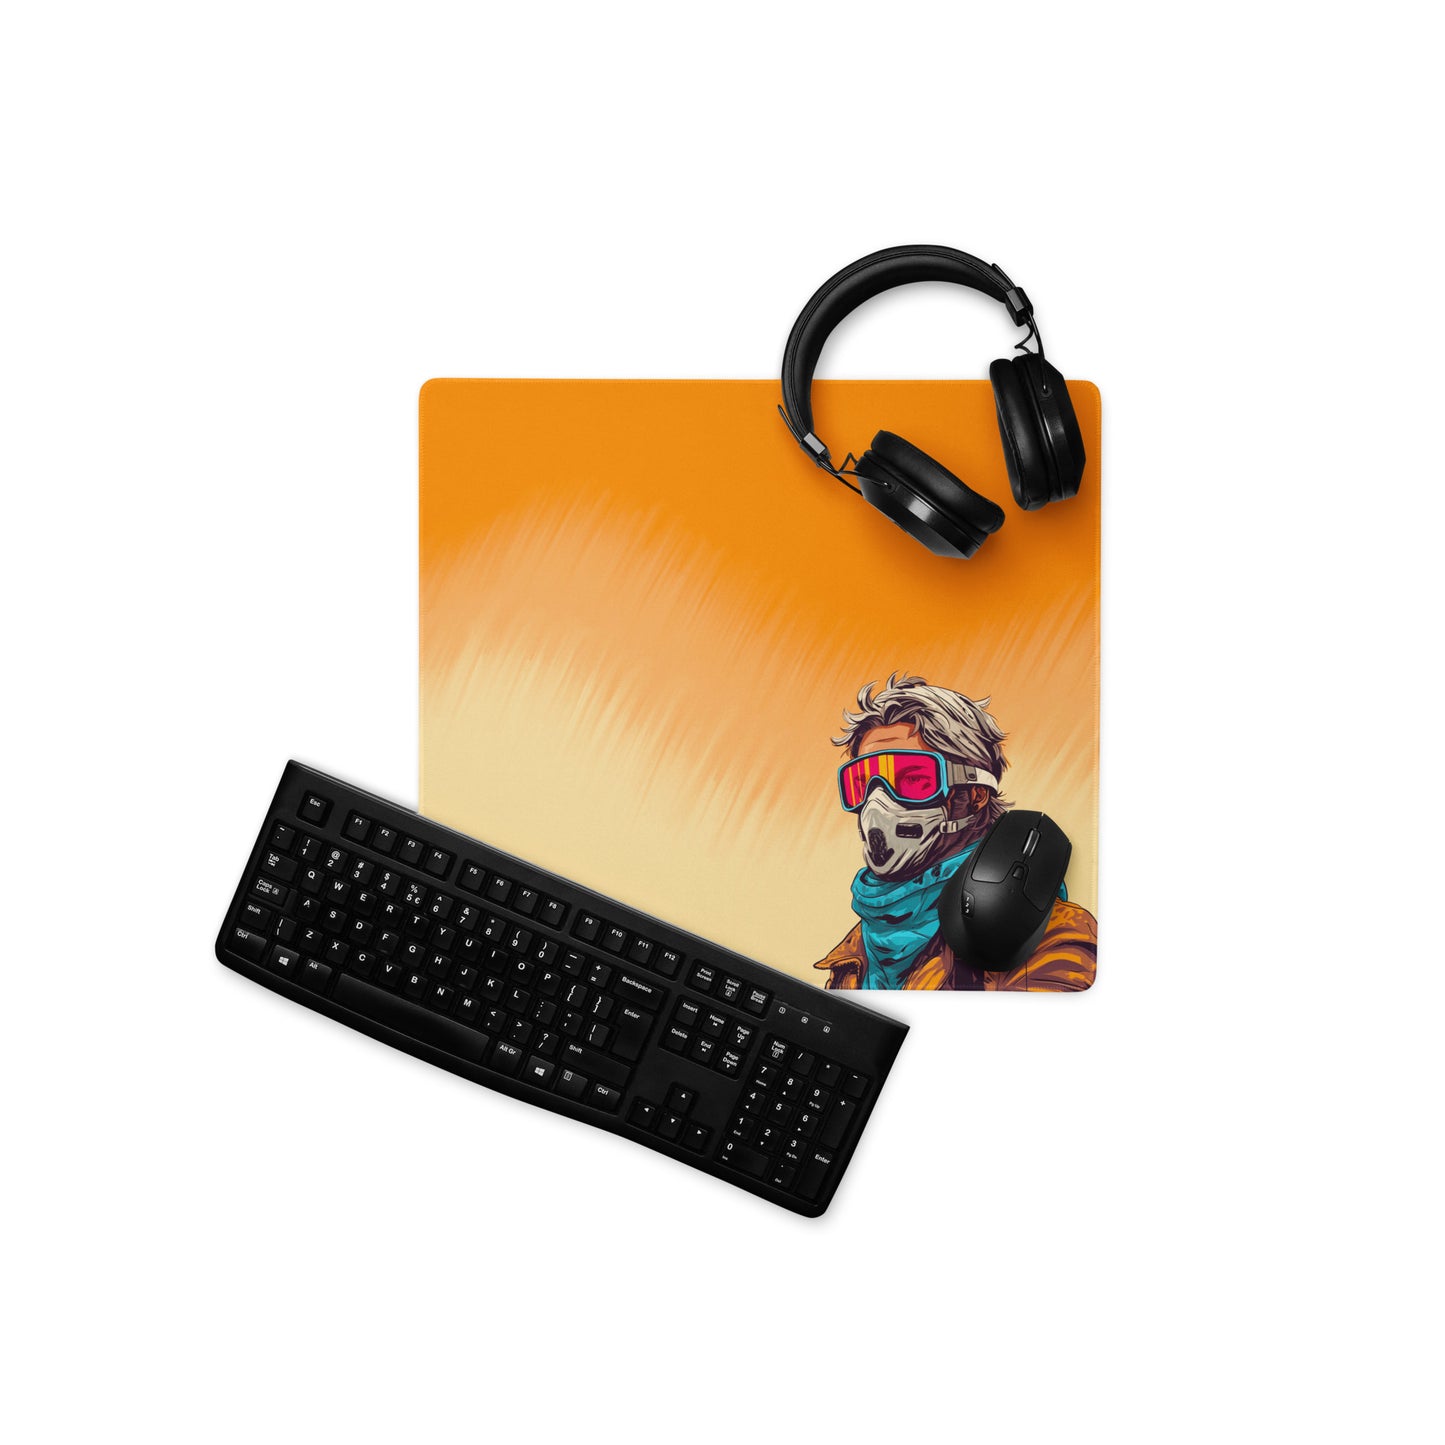 A 18" x 16" desk pad with a man standing in a sandstorm. With a keyboard, mouse, and headphones sitting on it.